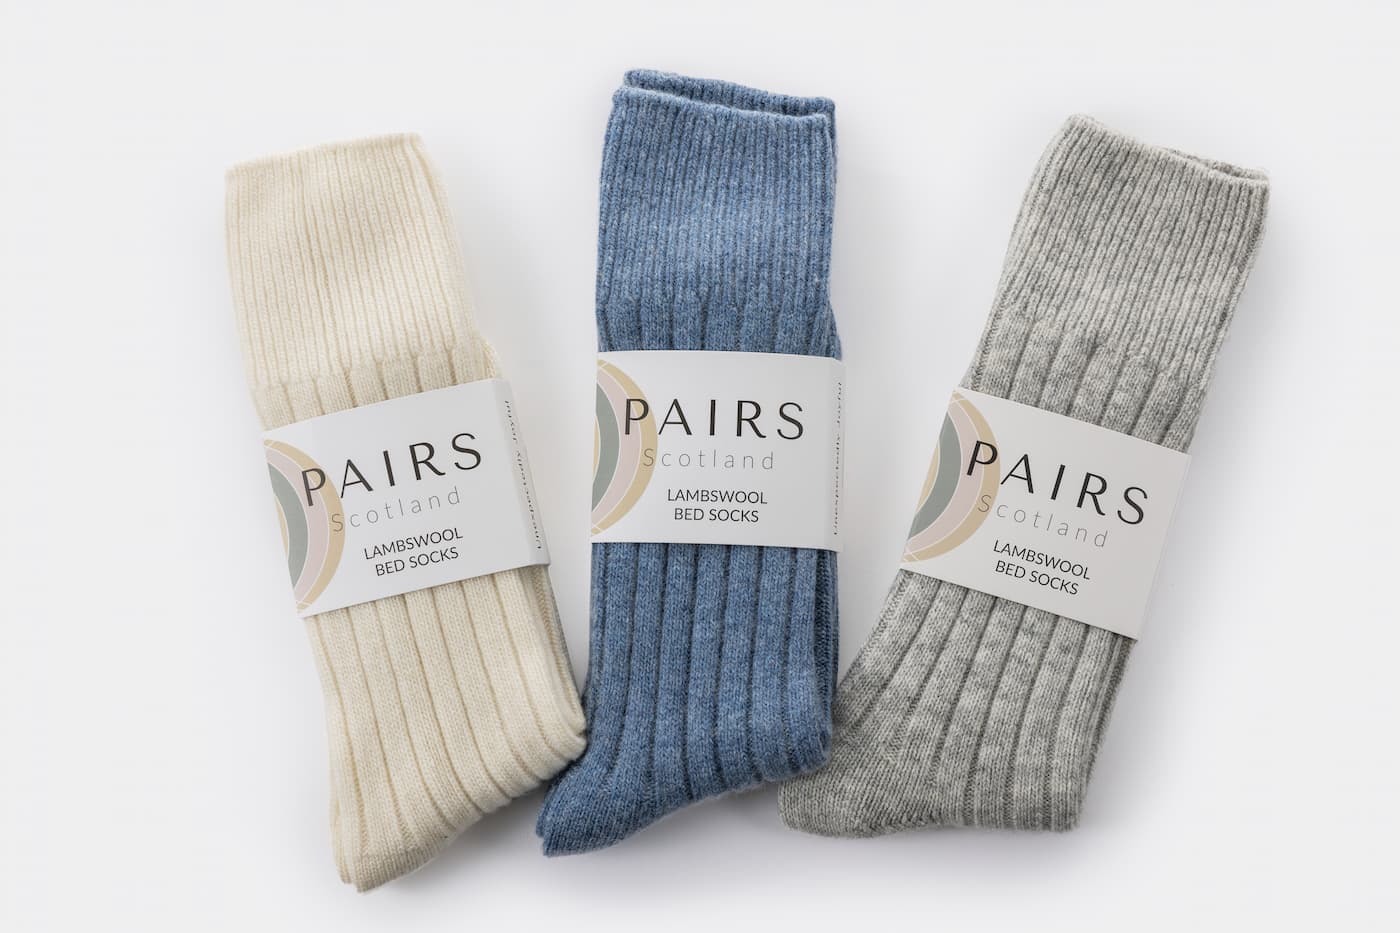 Why I Sleep Better In Bed Socks, Even In Summer! – Pairs Scotland